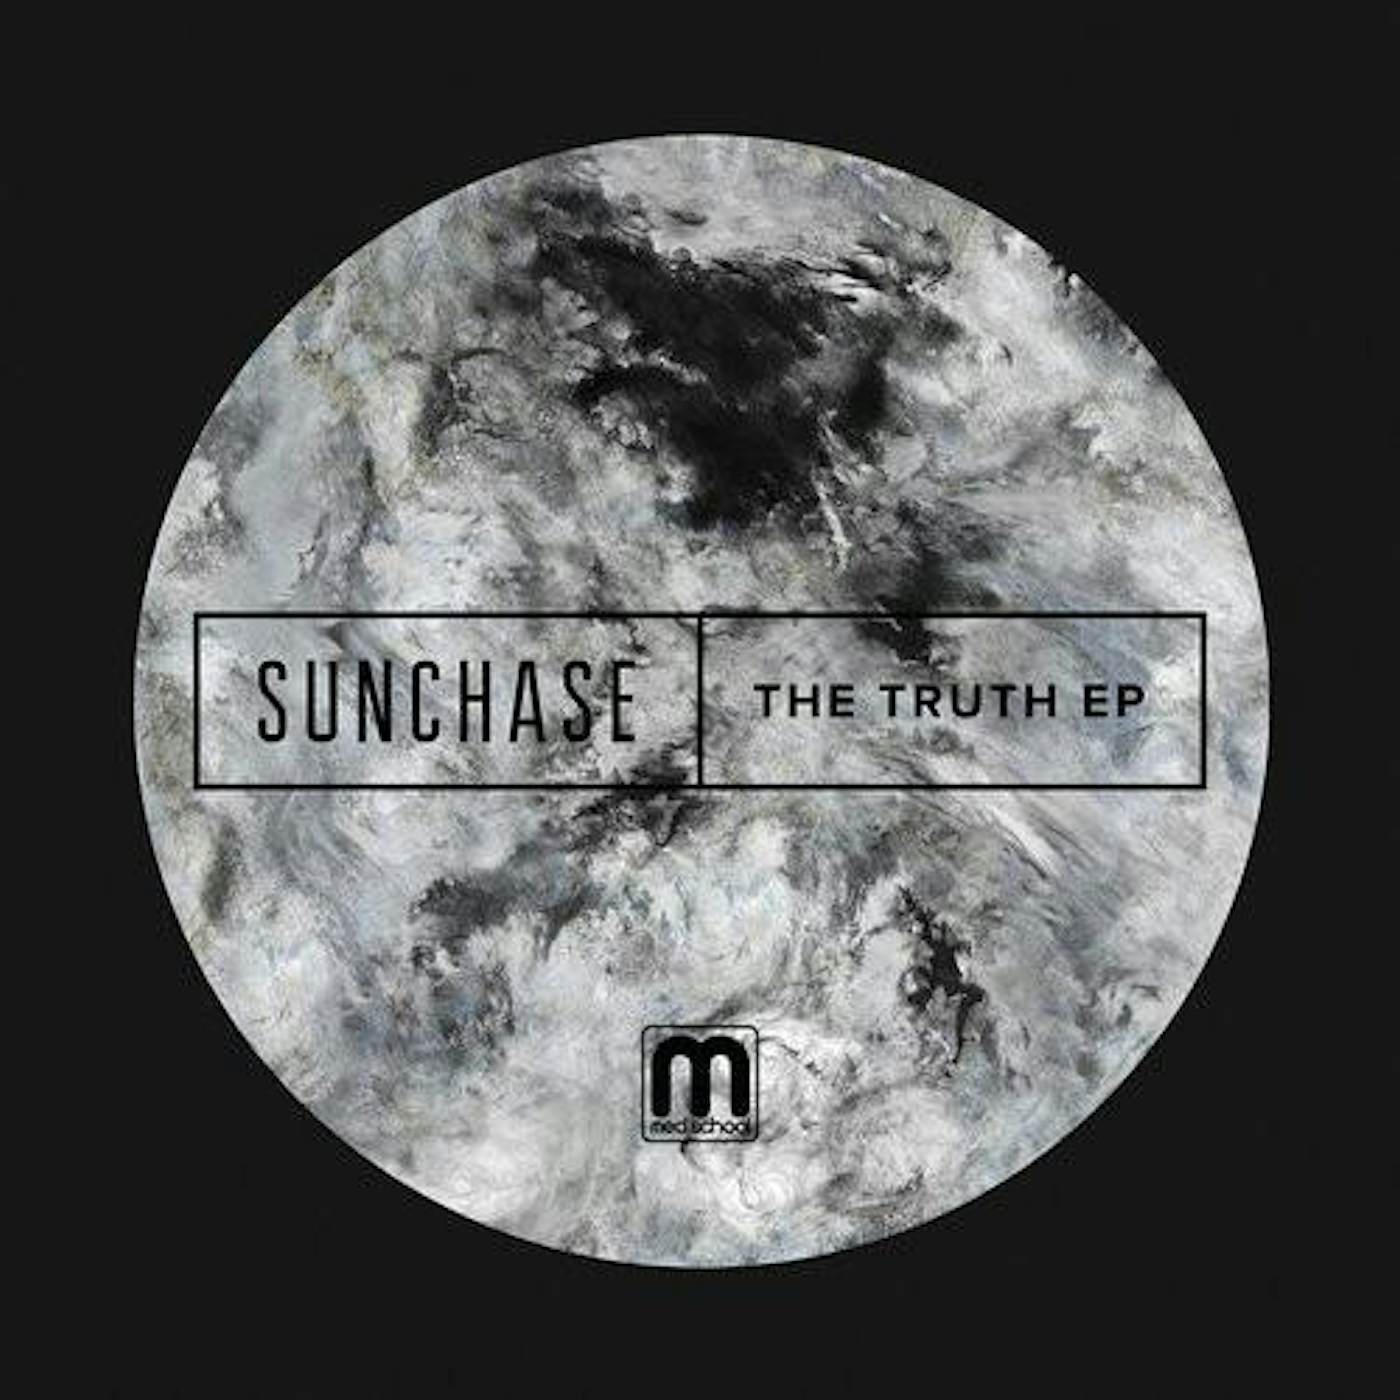 Sunchase The Truth Ep Vinyl Record